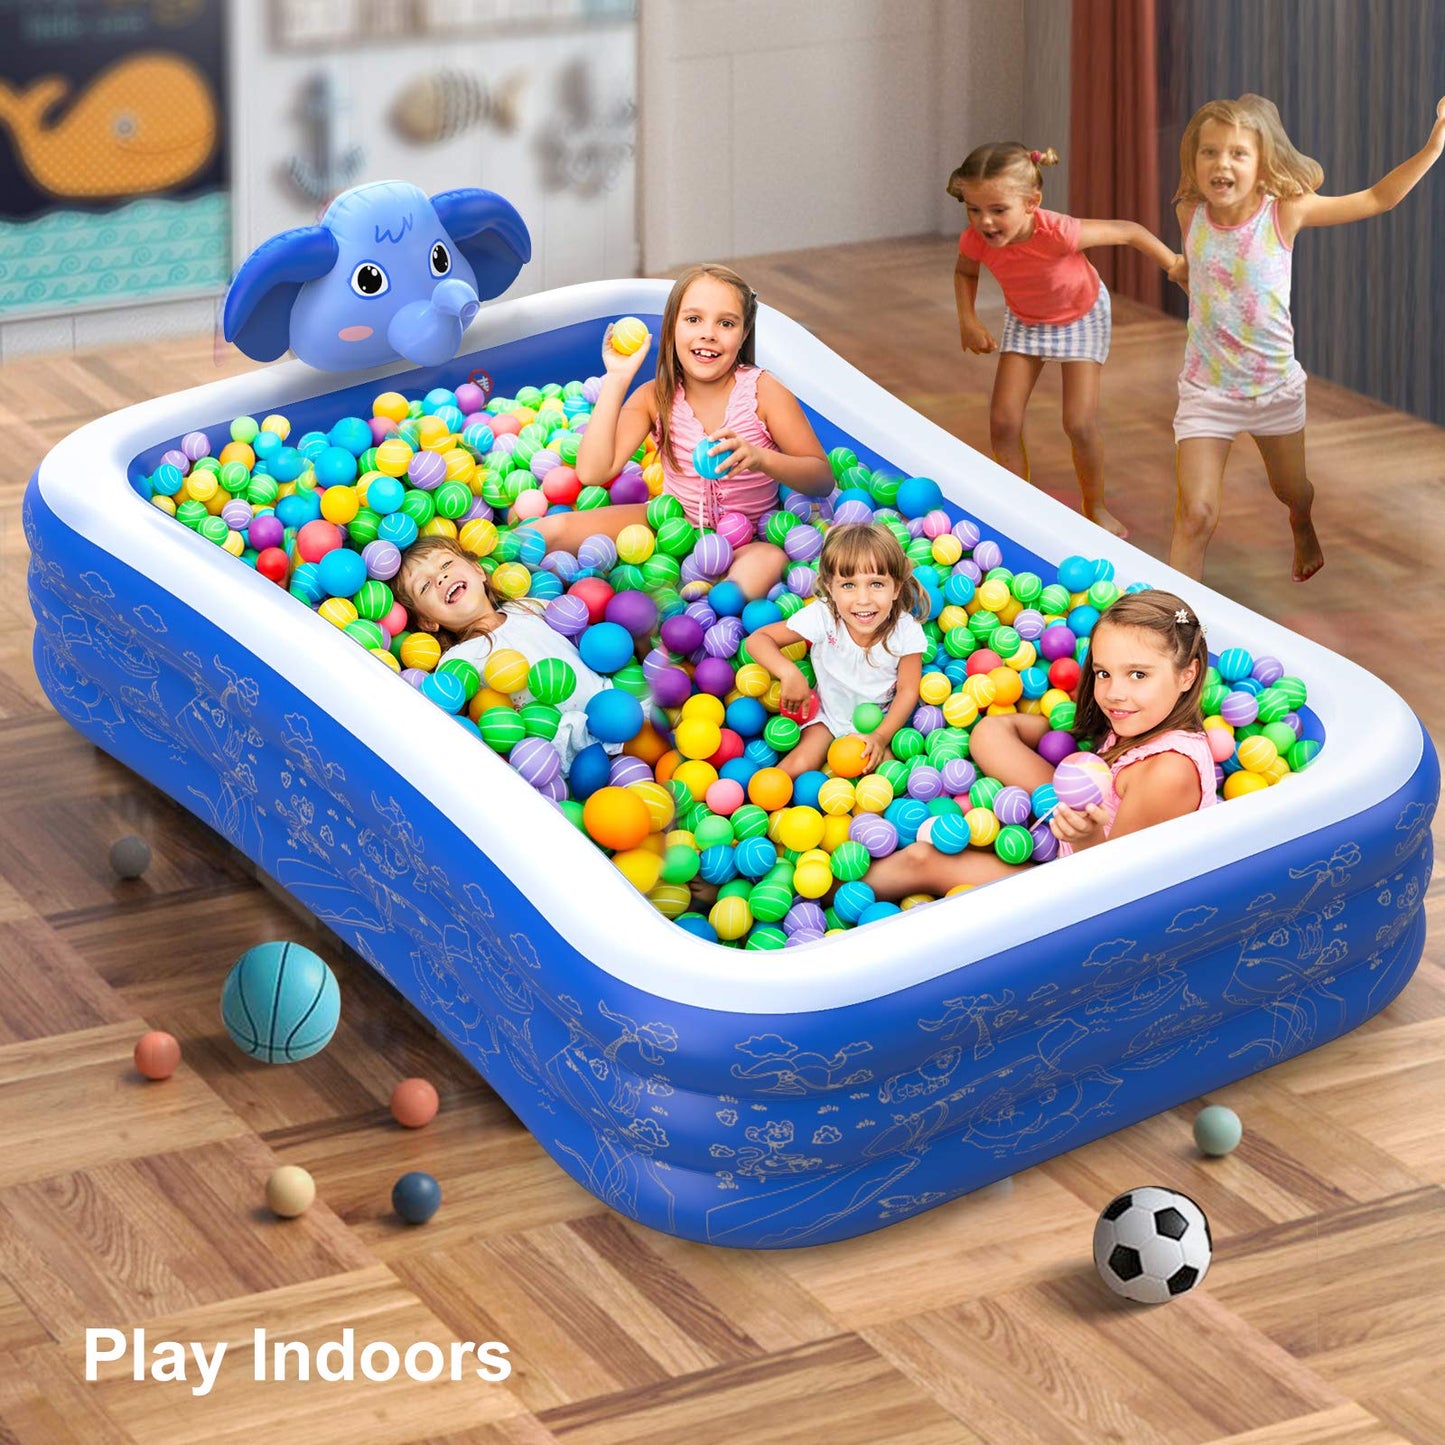 Hamdol Inflatable Swimming Pool with Sprinkler, Full-Sized Family Blow up Pool, Ages 3+, Indoor/Outdoor